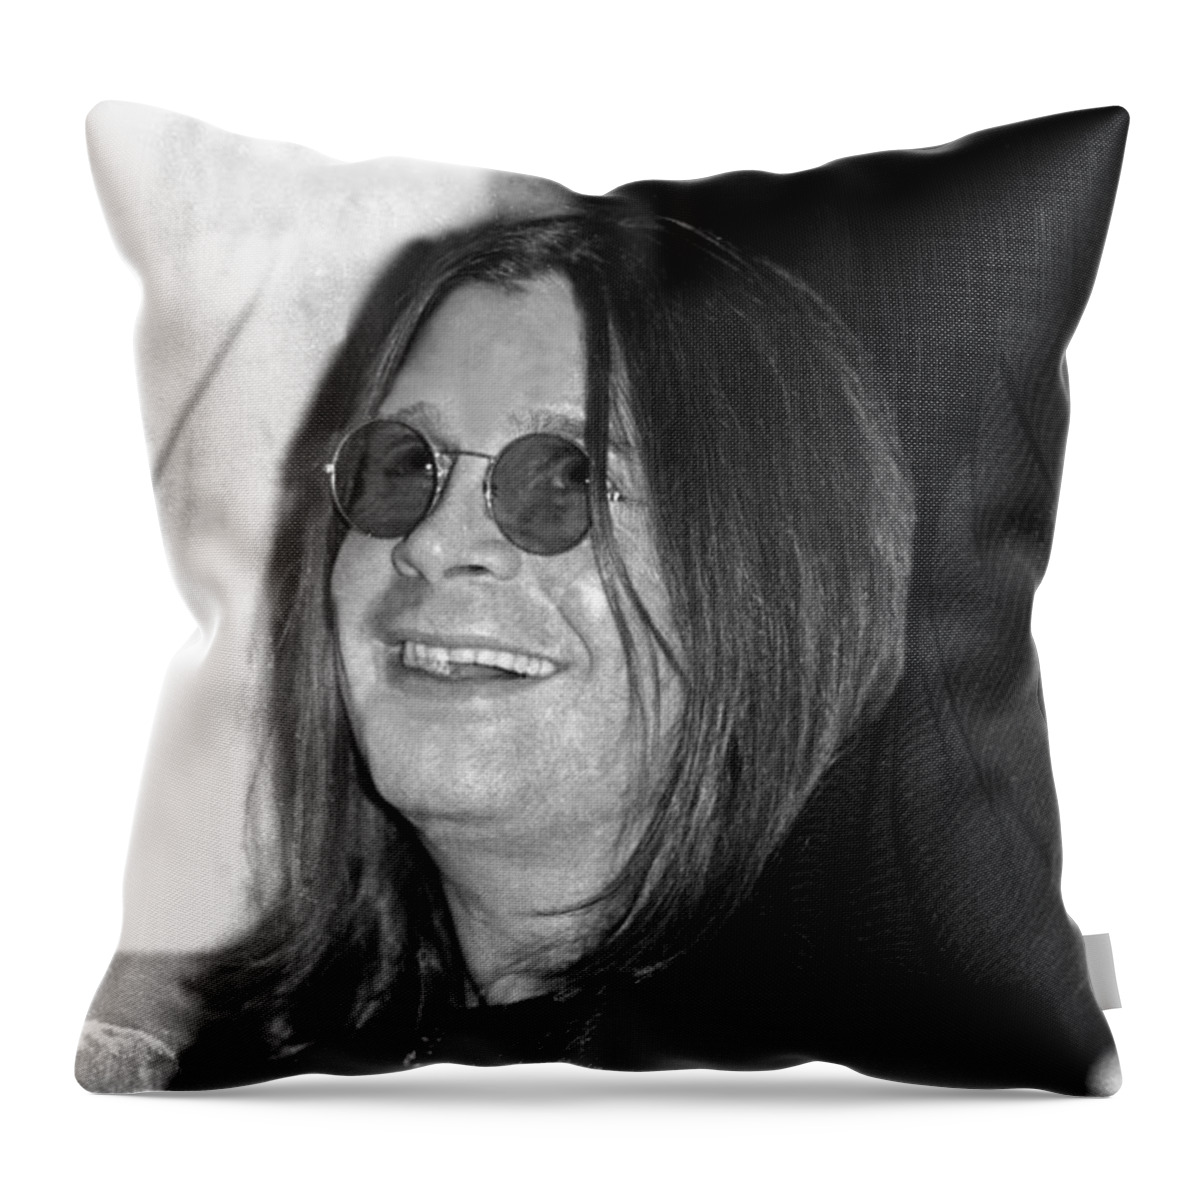 Singer Ozzy Osbourne Is Shown At A Radio Promotional Event Before His Concert Performance Throw Pillow featuring the photograph Ozzy Osbourne #2 by Concert Photos